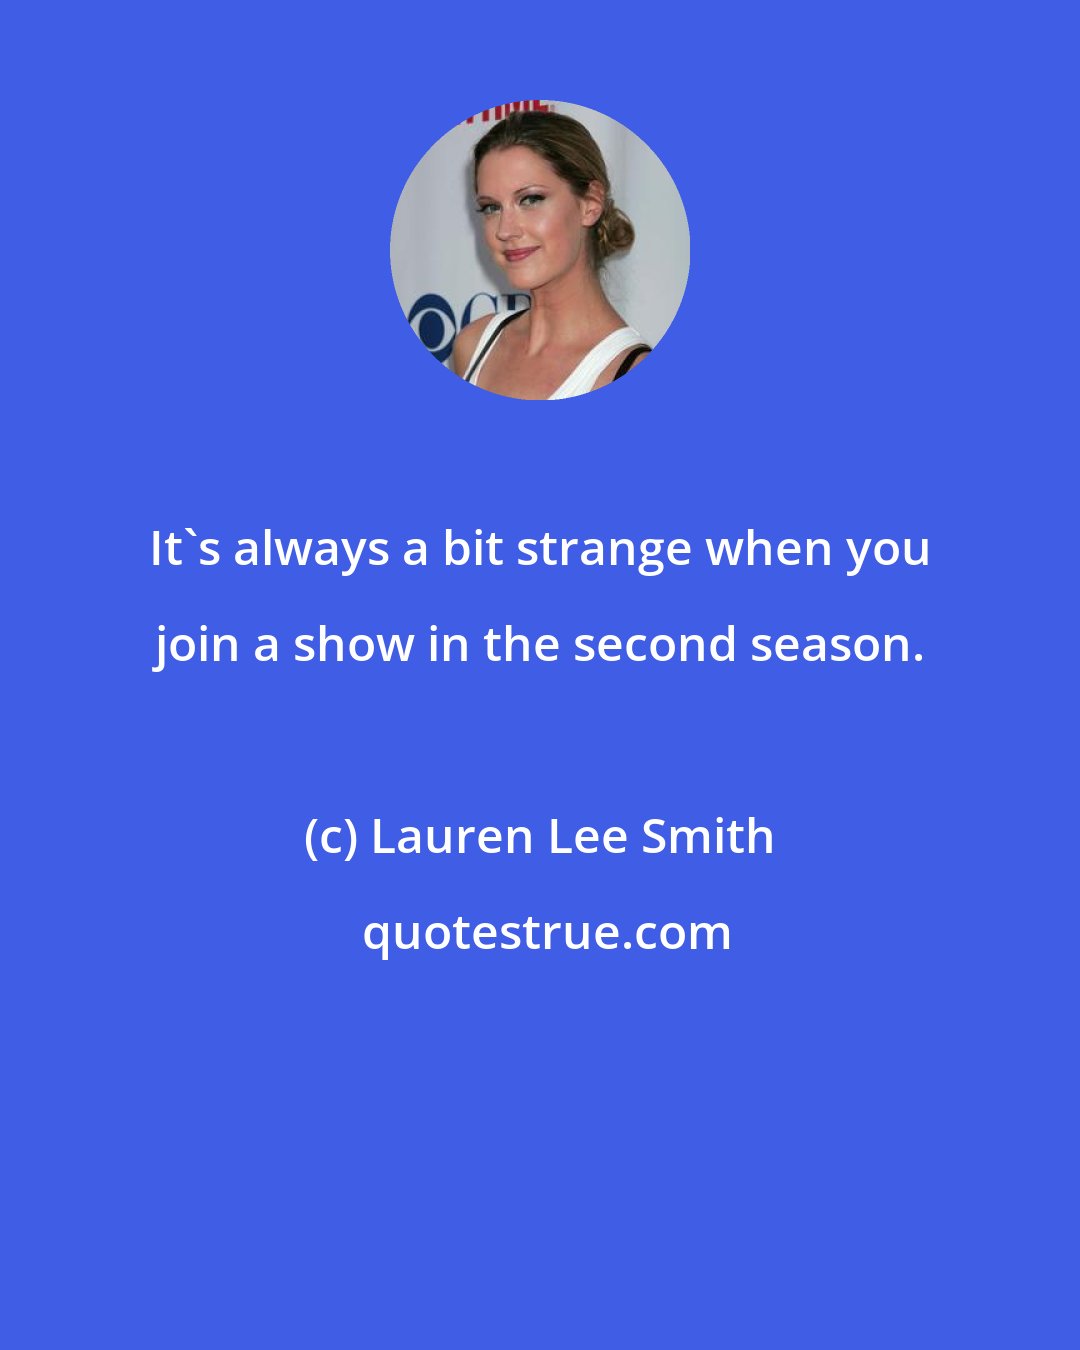 Lauren Lee Smith: It's always a bit strange when you join a show in the second season.